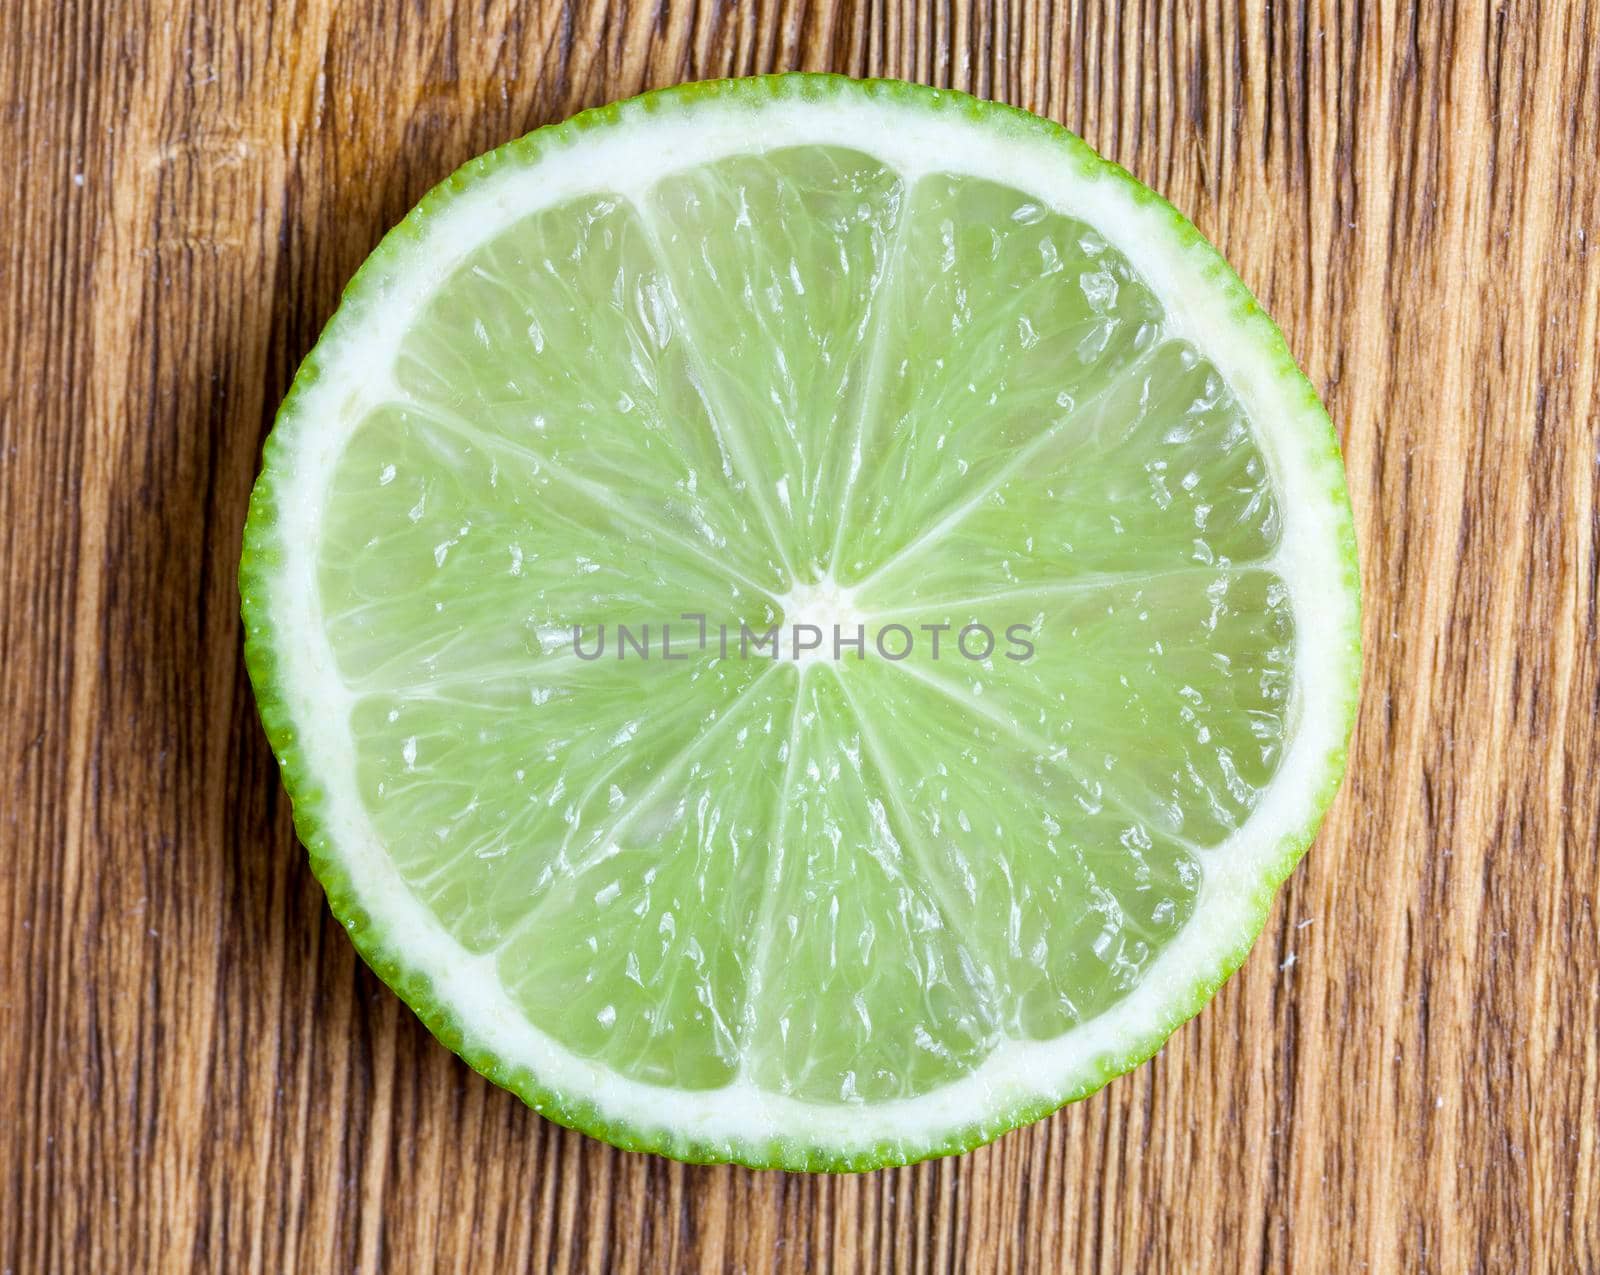 cut across the green lime, laid on a wooden table, closeup of a citrus food, top